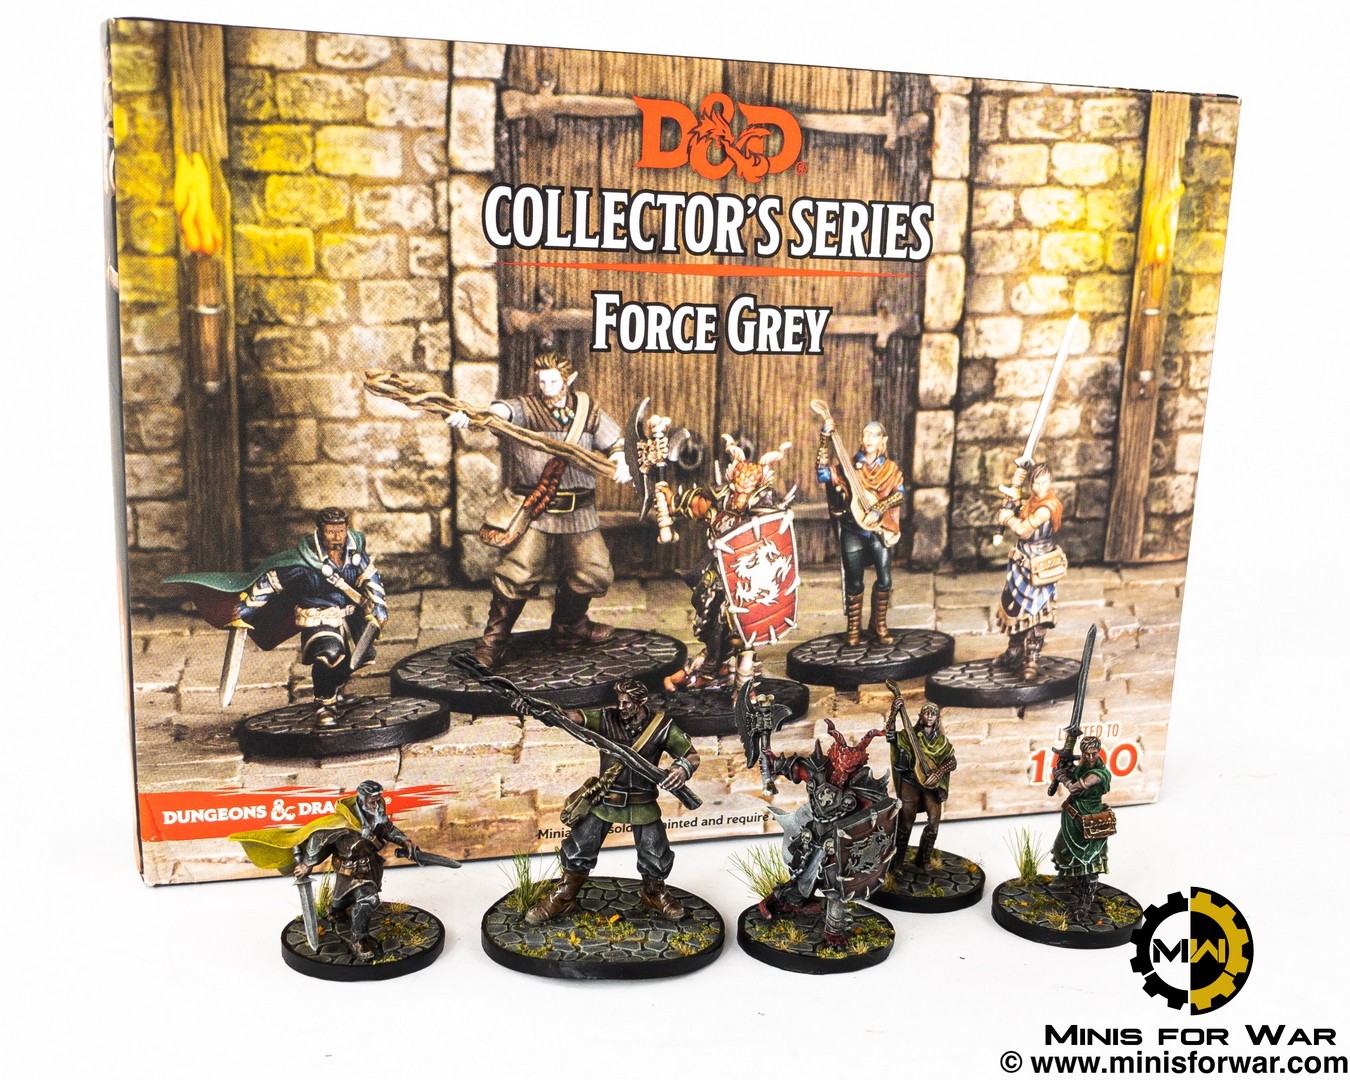 Limited Edition Force Grey Dungeons & Dragons D&D Collectors Series Miniatures 